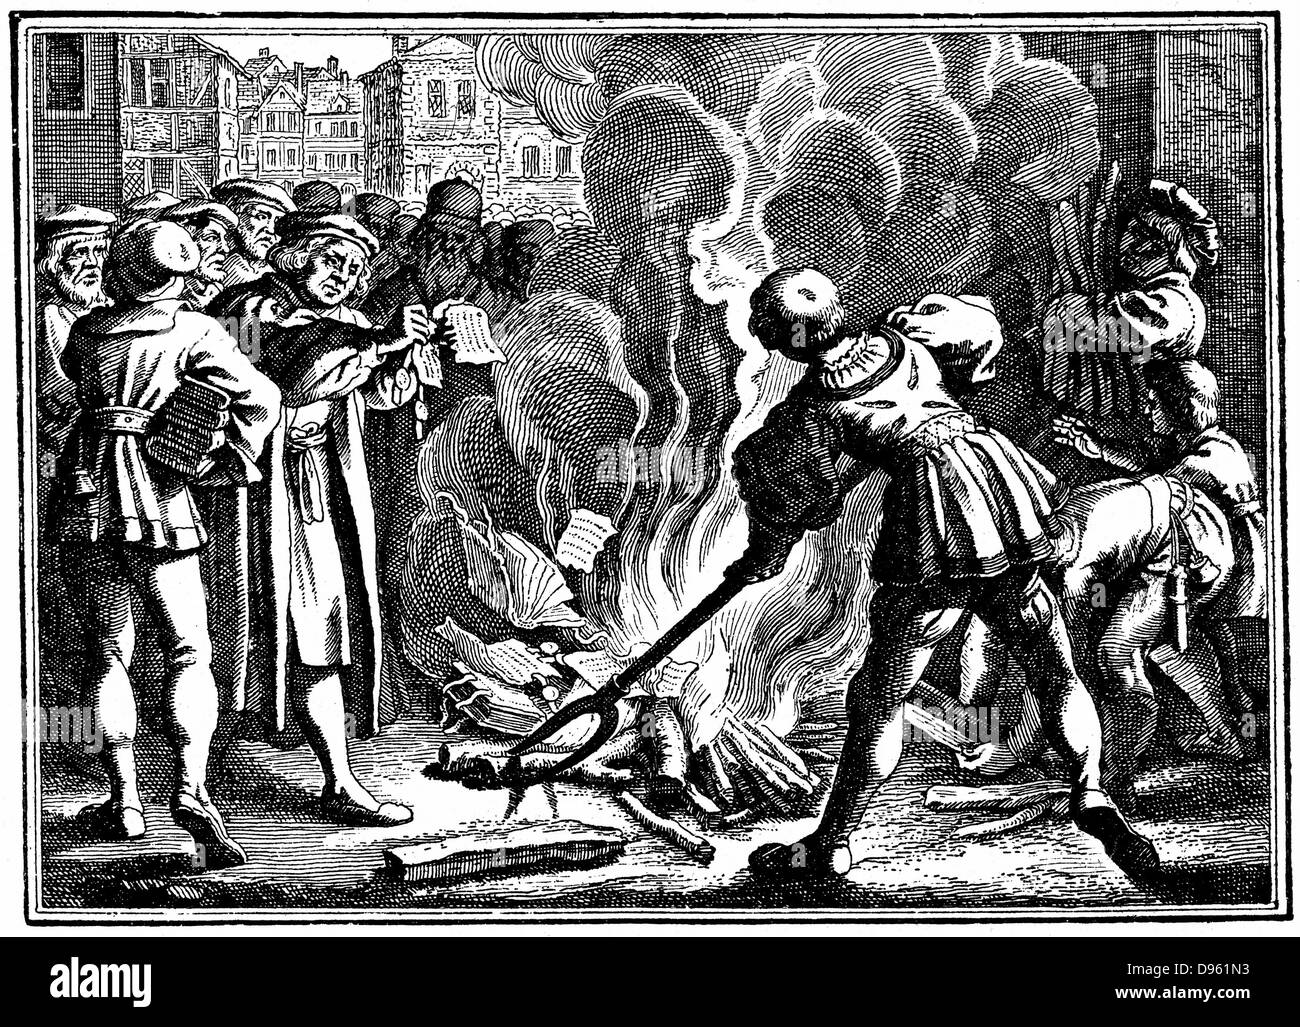 Martin Luther (1483-1546) German Protestant reformer, burning the Papal Bull excommunicating him. Wittenberg, 1520. Stock Photo